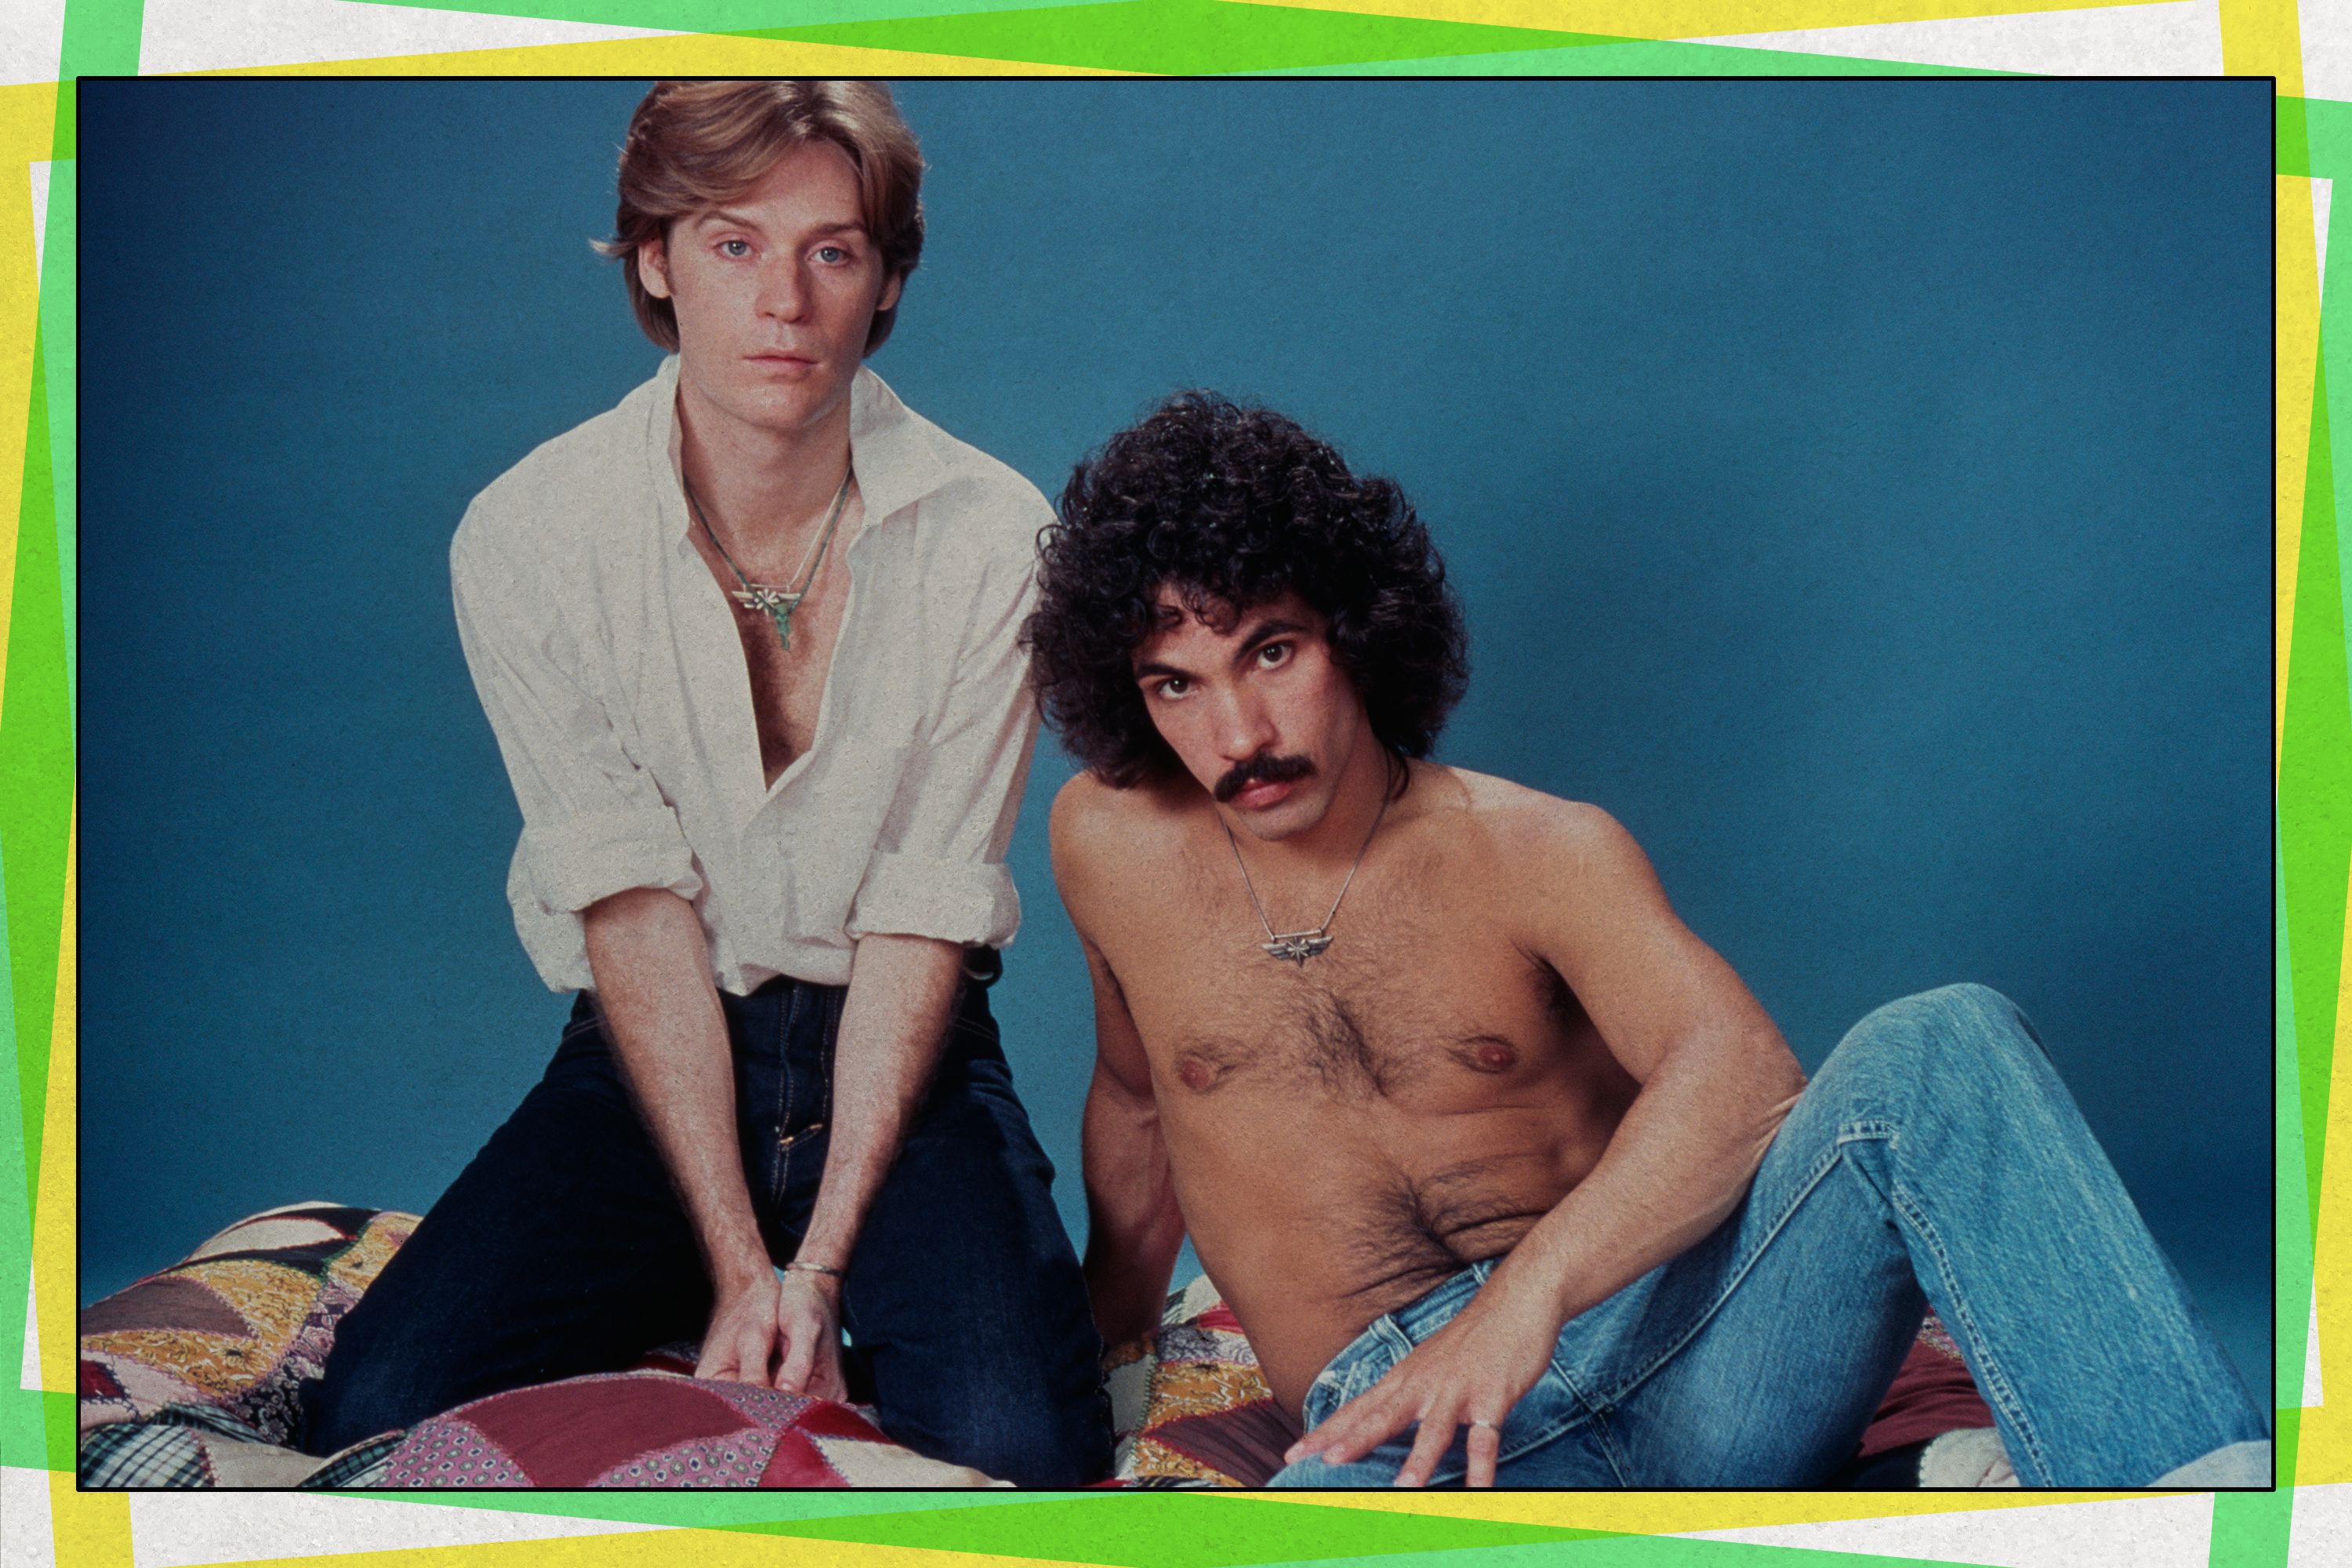 Daryl Hall & John Oates The Untold Connection Between 'I Can't Go For